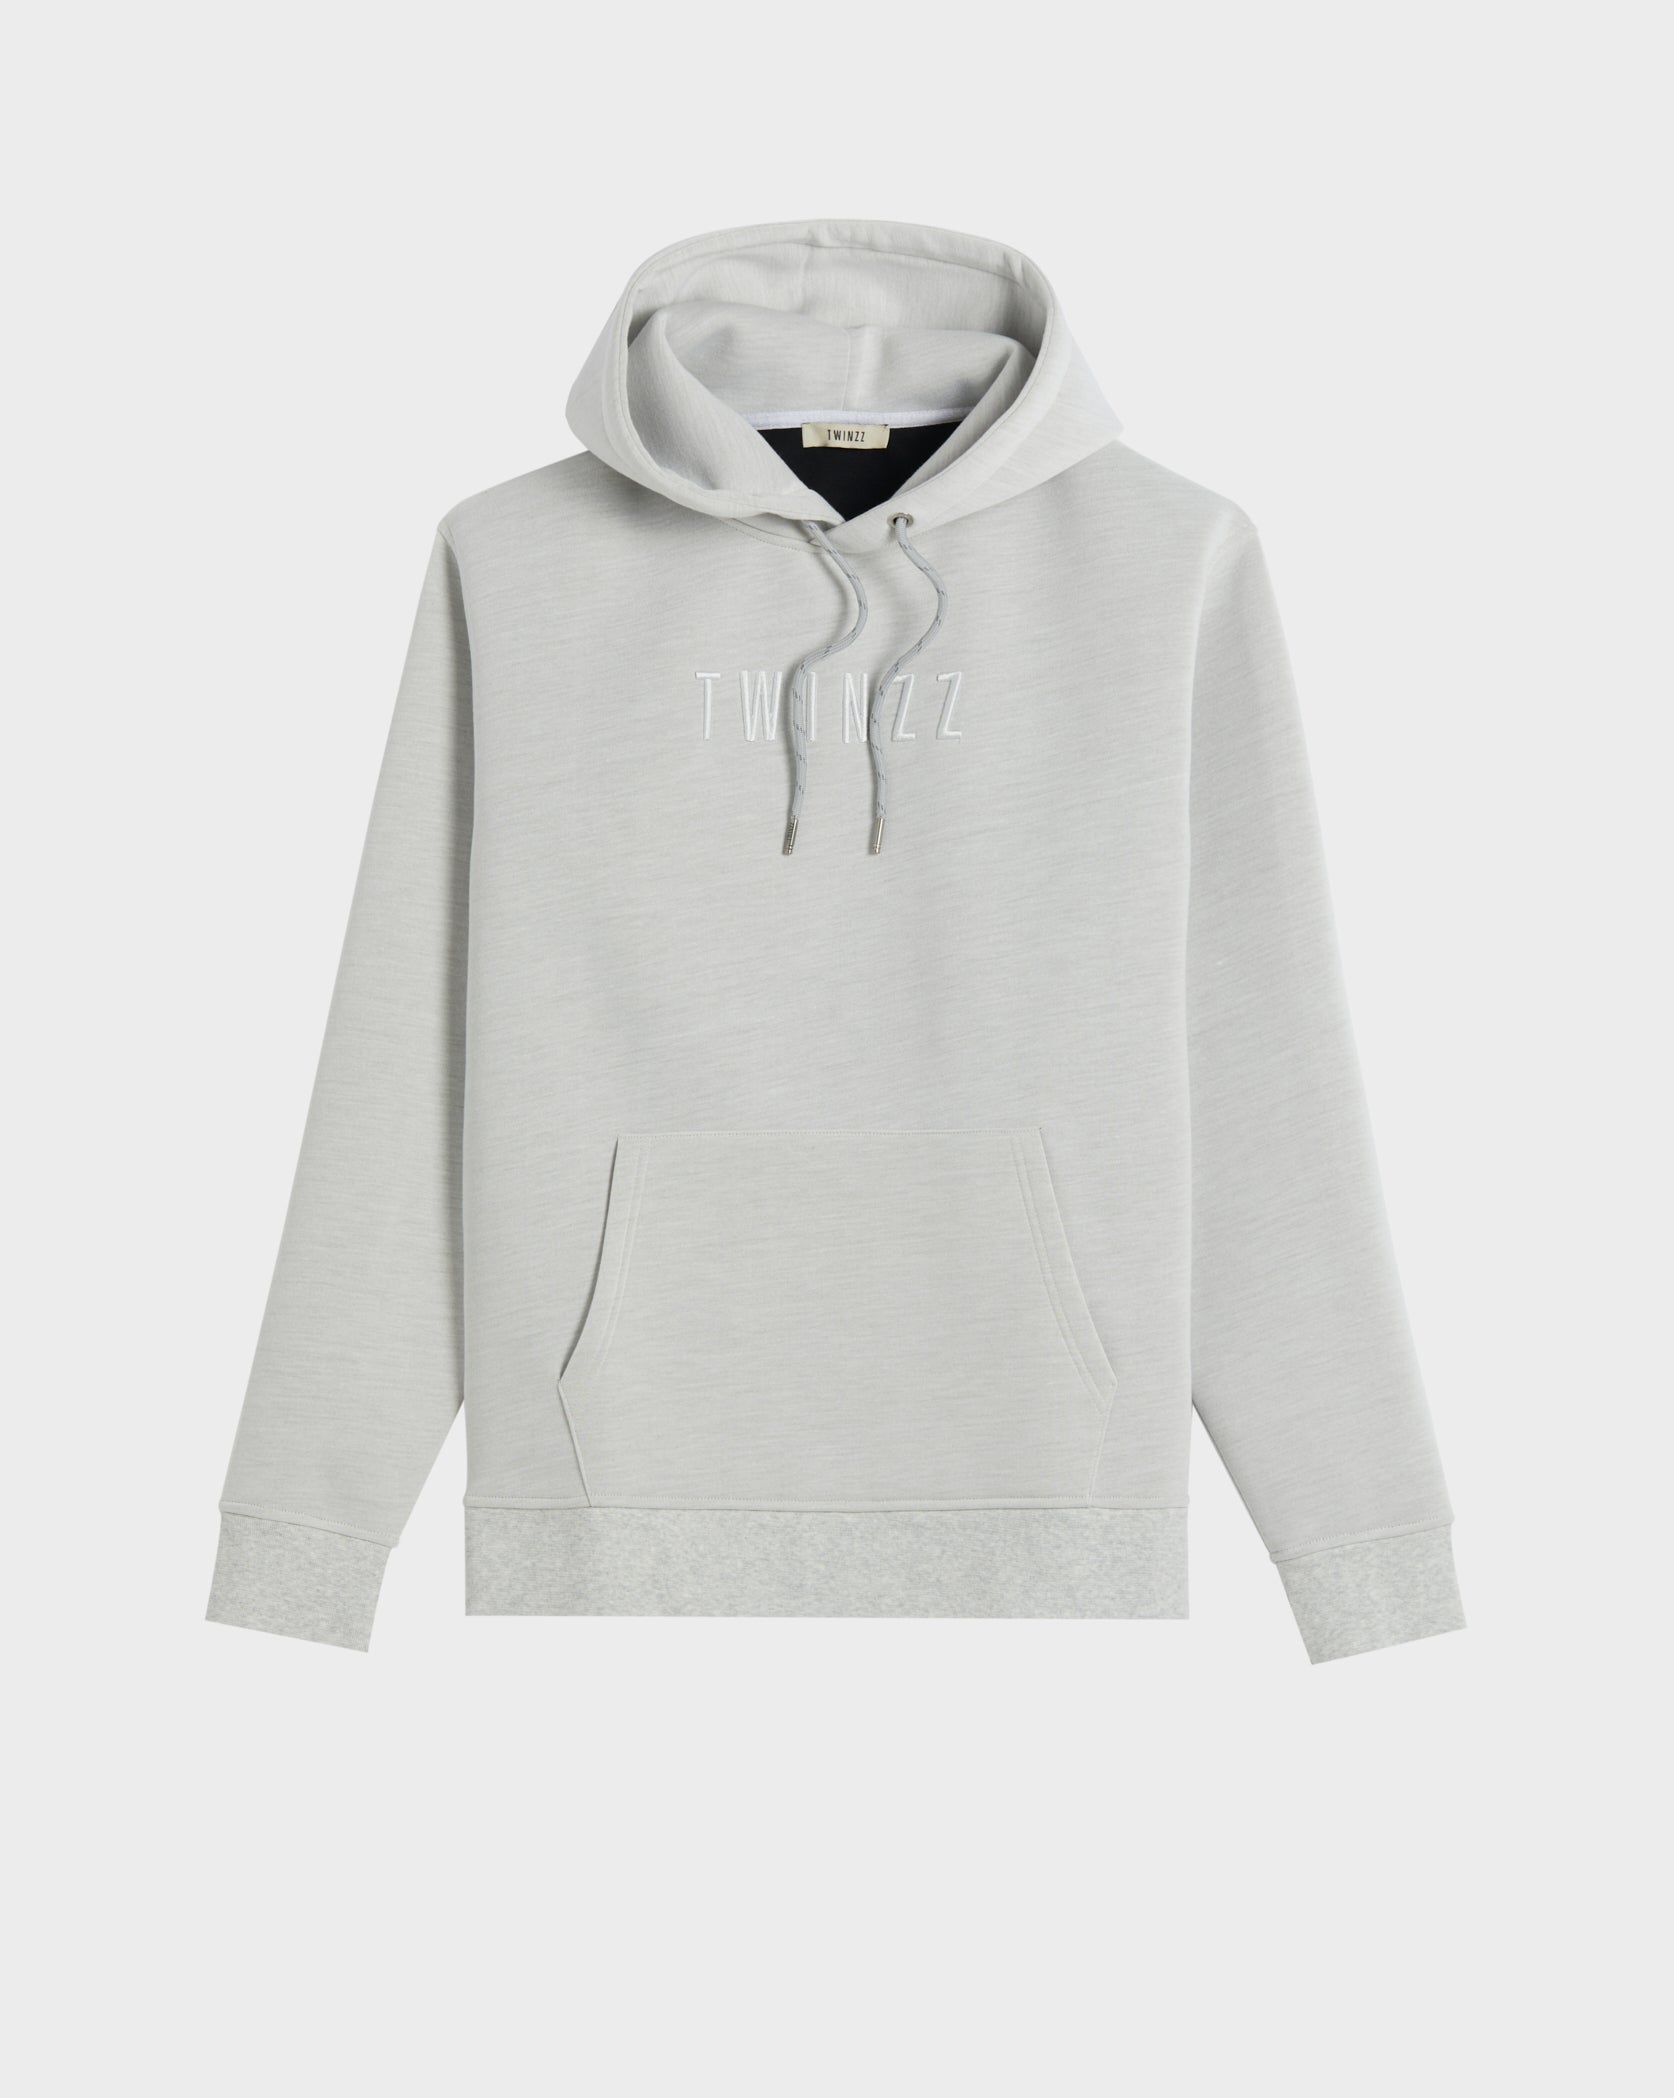 Twinzz grey hoodie front